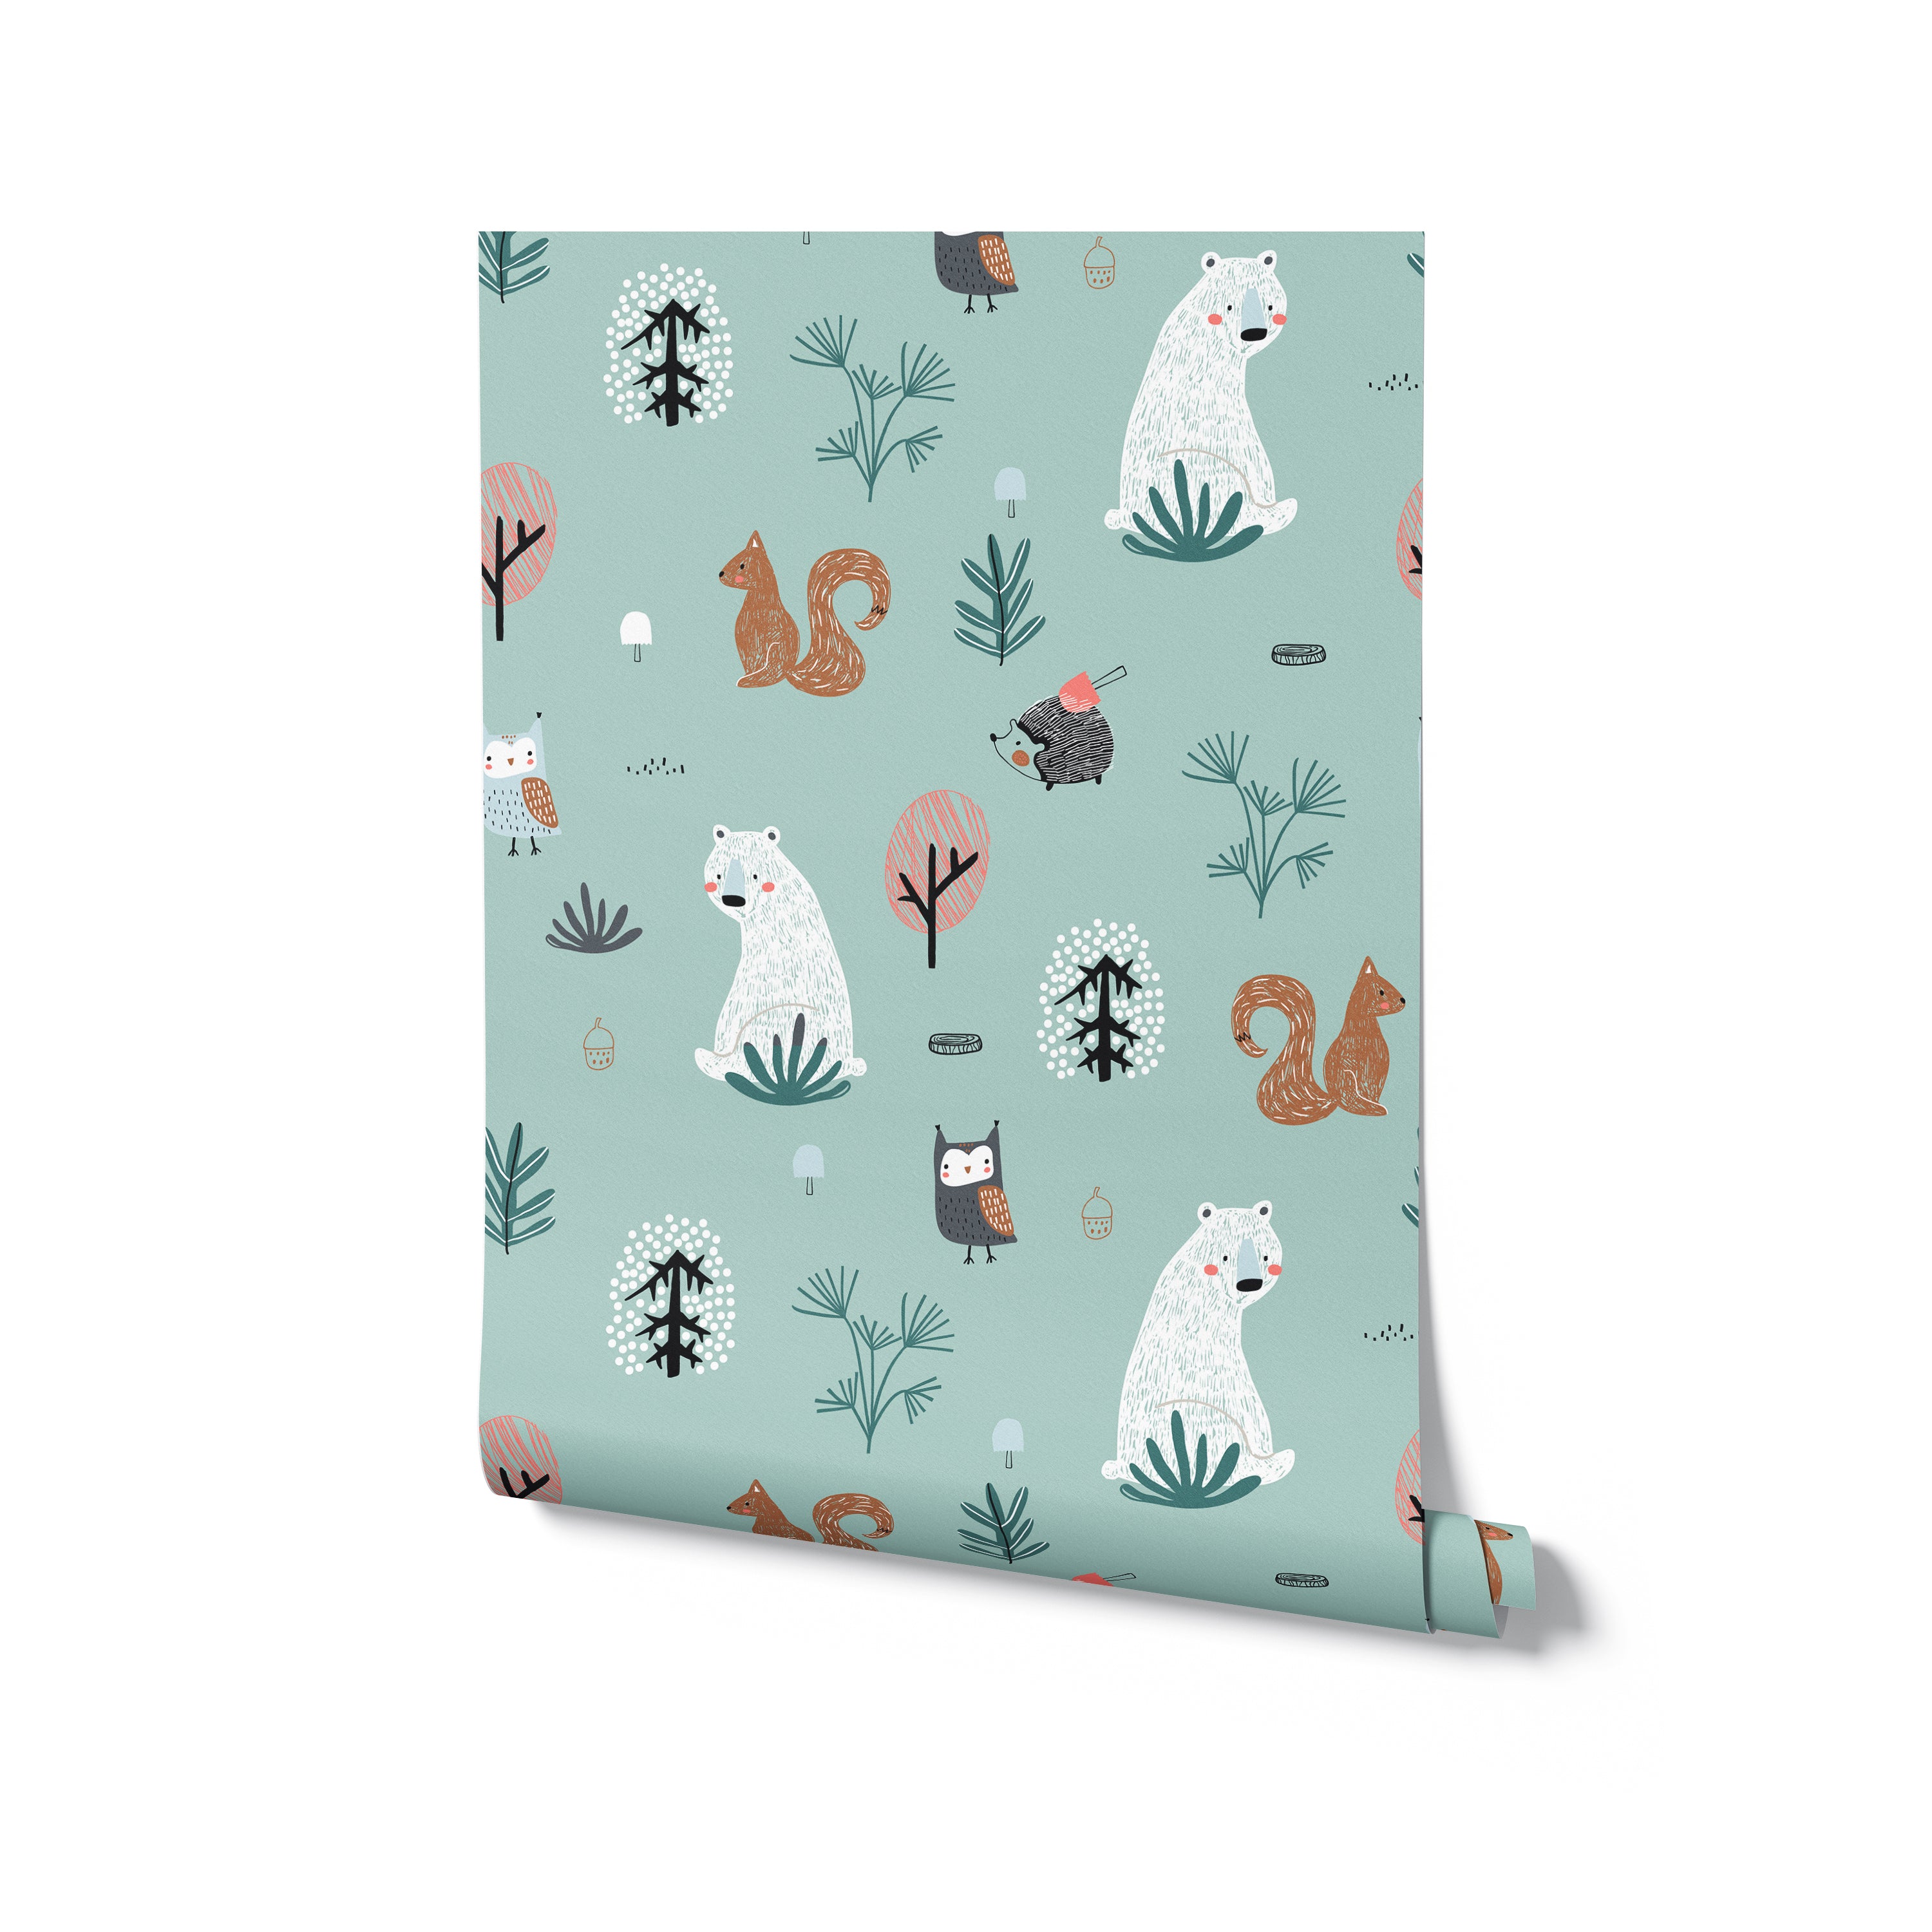 This image presents a roll of "Kids Wallpaper - Forest Critters - 25 inches." The wallpaper rolls display an engaging pattern of woodland animals and nature elements on a teal background, perfect for adding a playful yet soothing touch to children’s spaces.